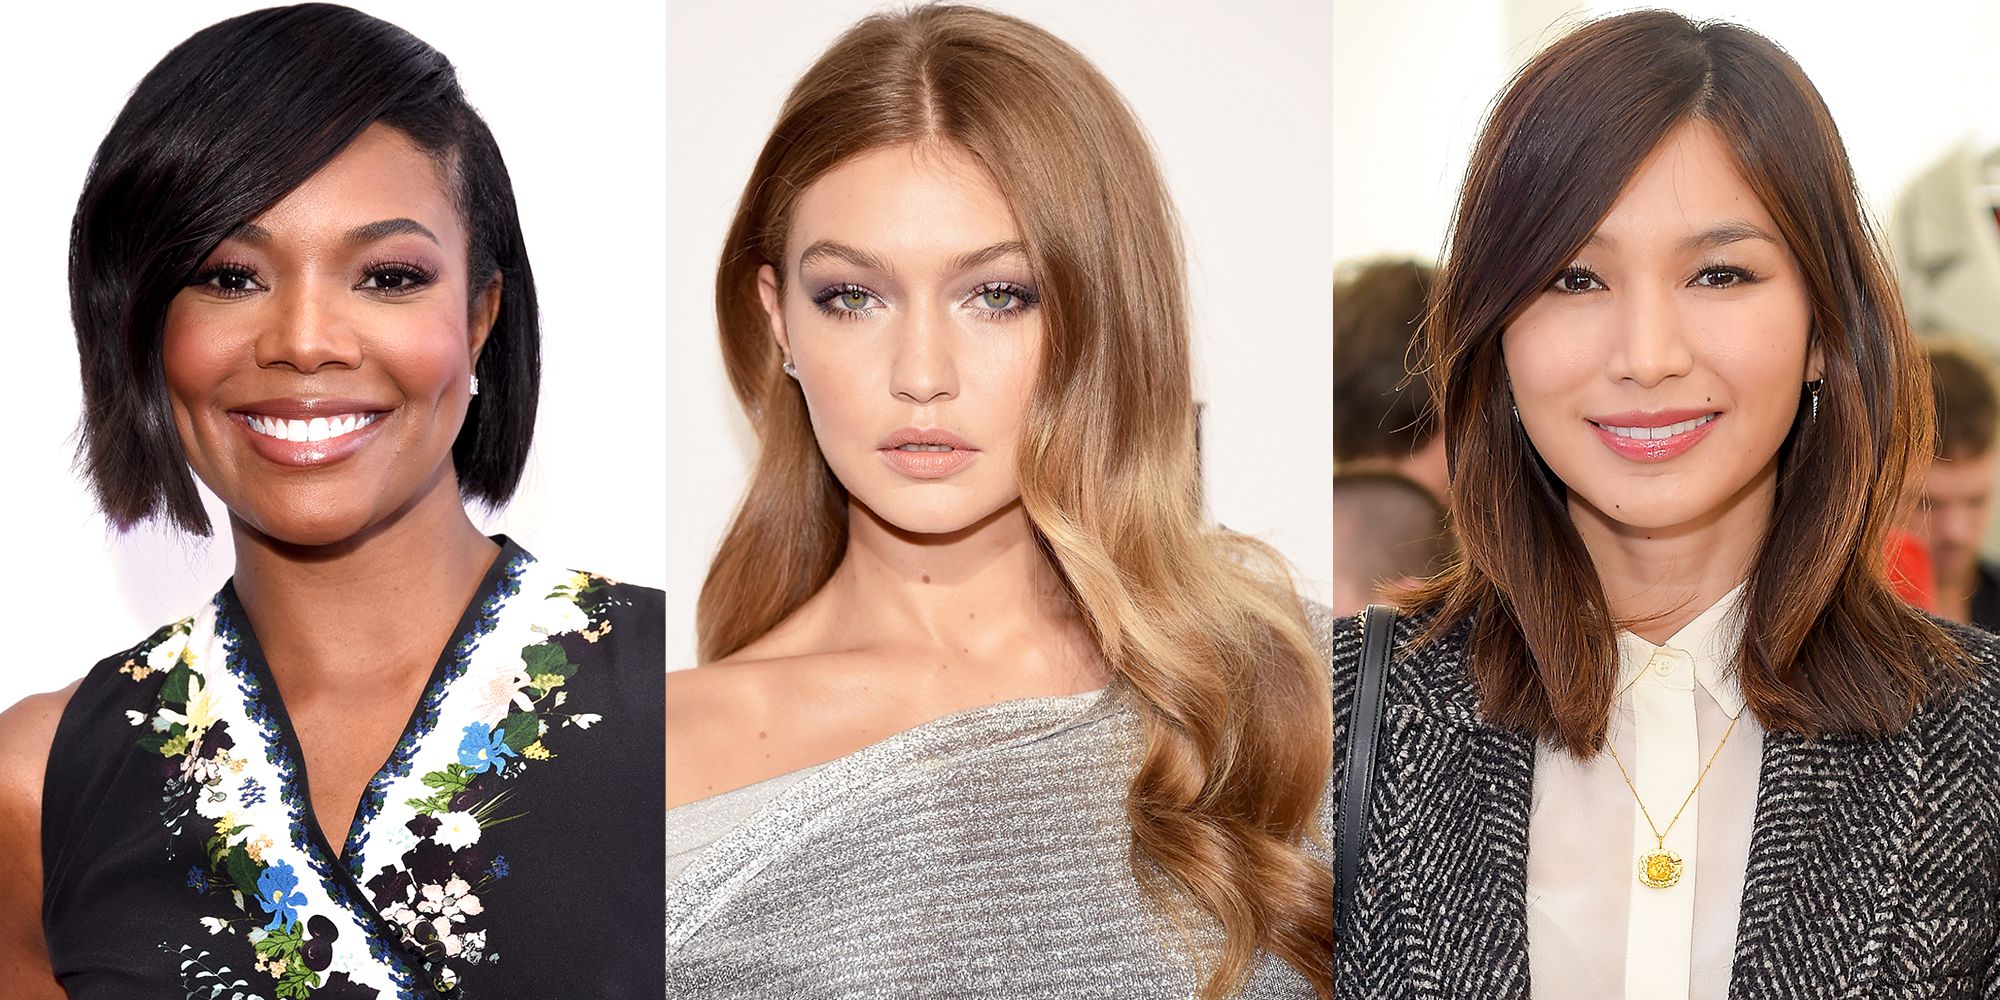 Nude Hair Color Trend — How to Get Neutral Blonde Hair